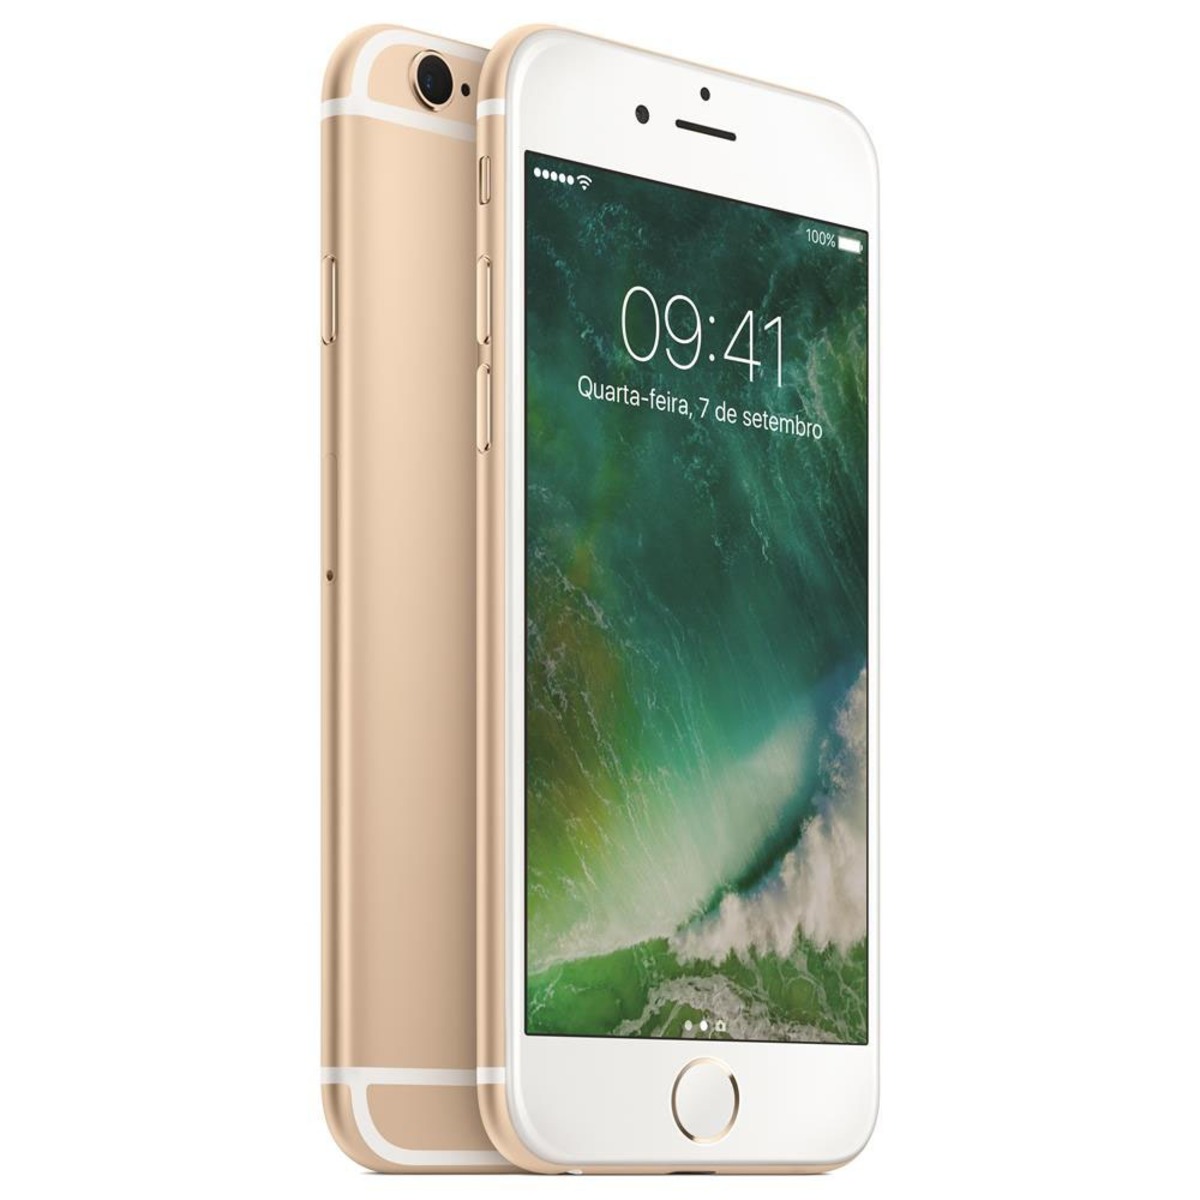 iPhone 6s (Silver, 32 GB) Mobile Phone online at Best Prices in India